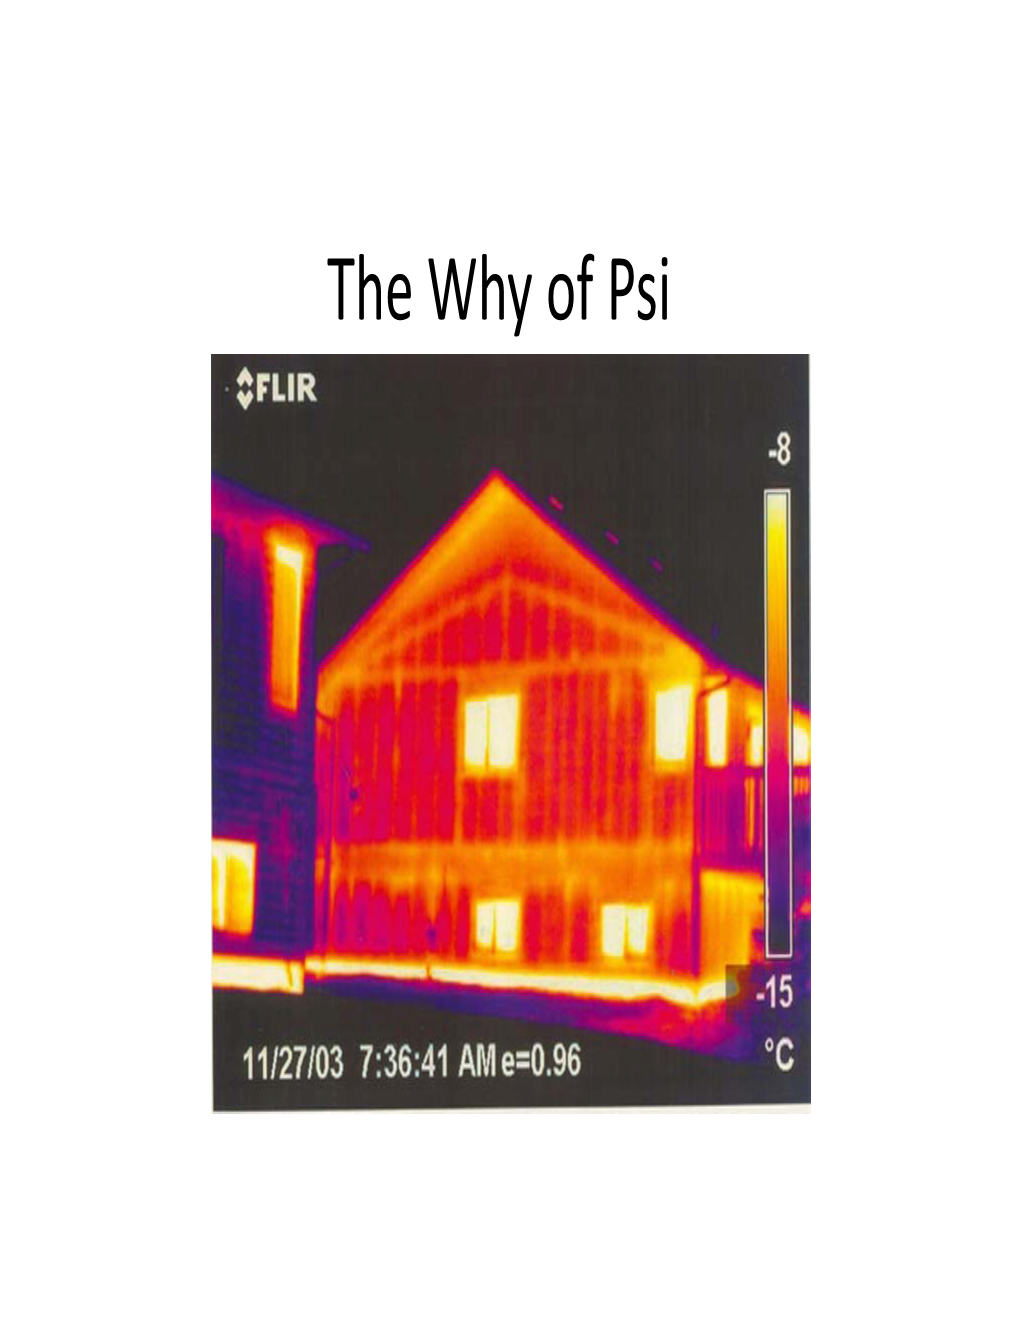 The Why of Psi the Why of Psi